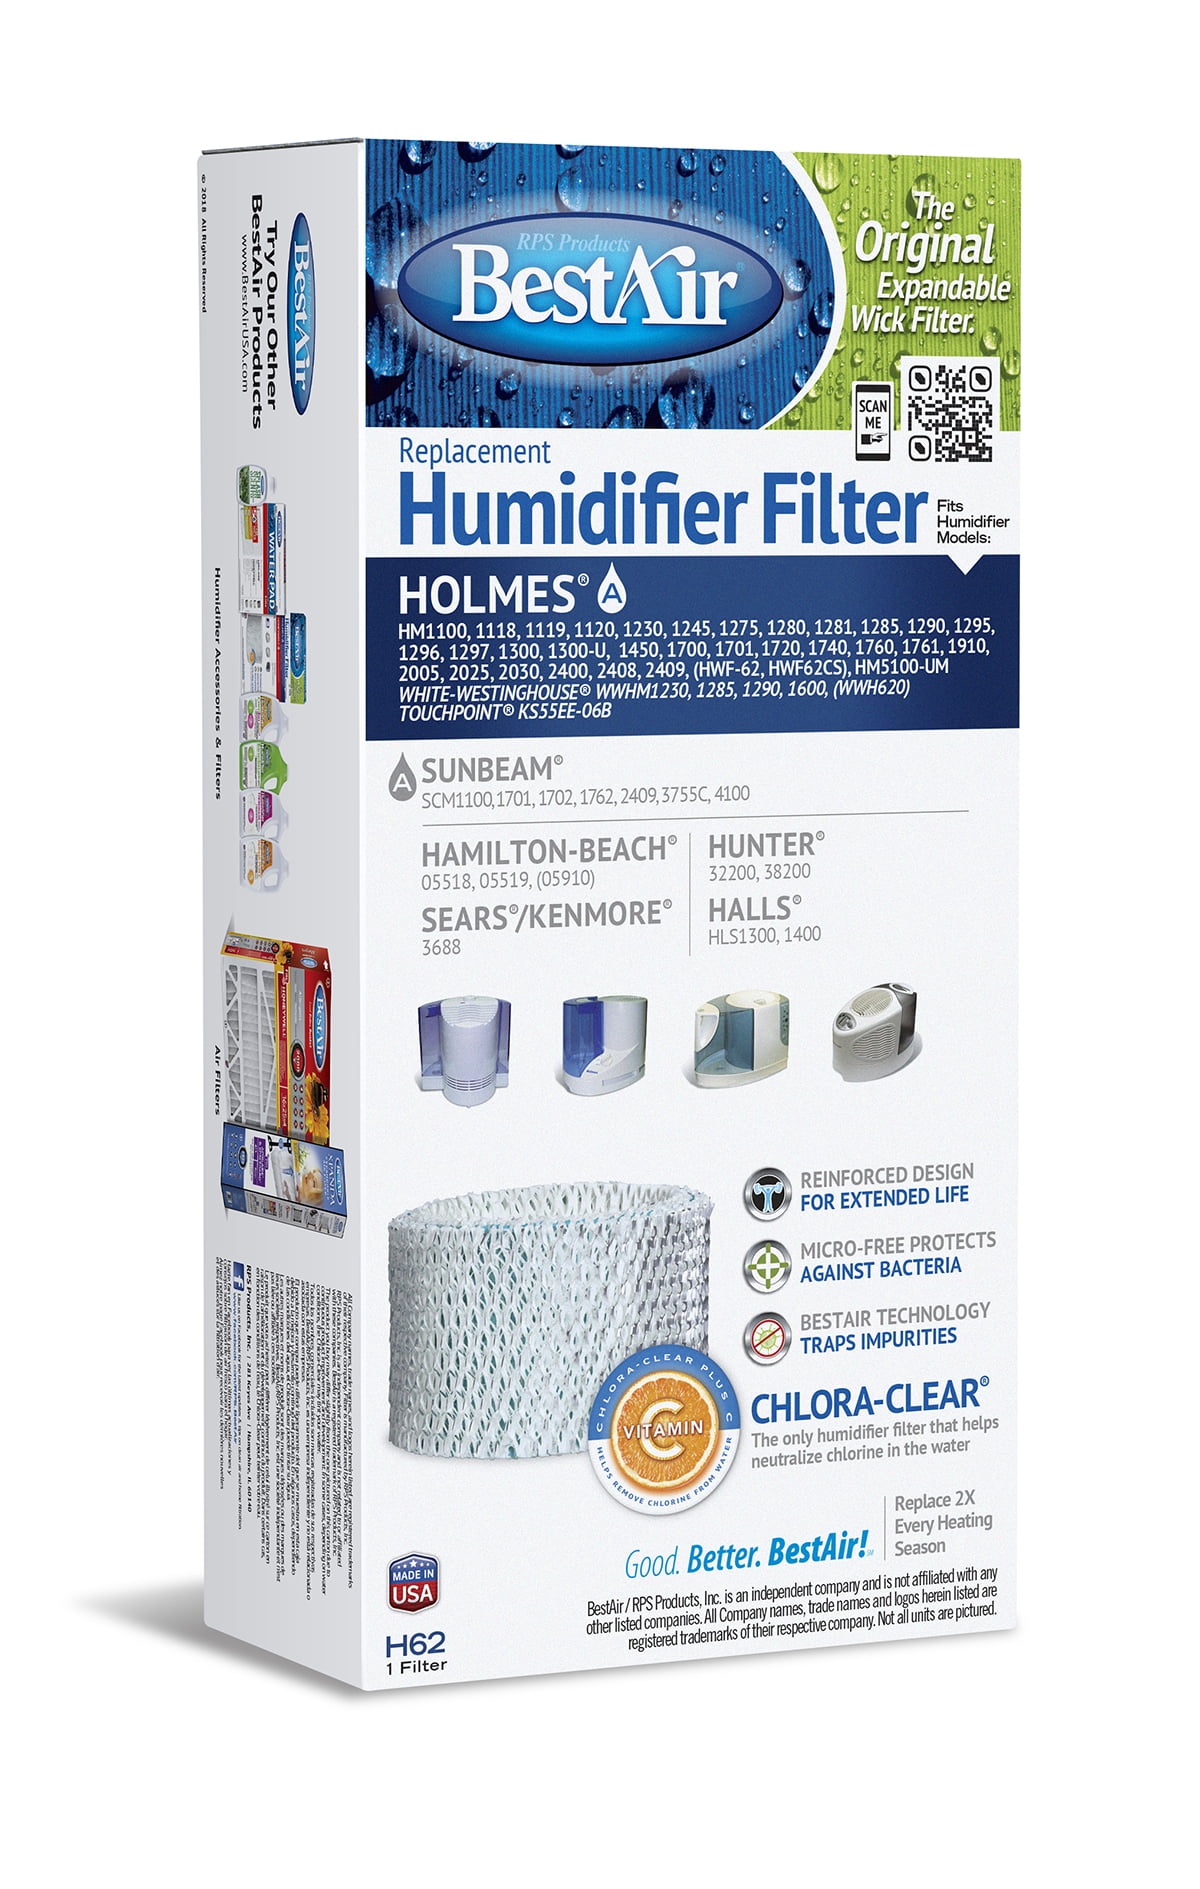 fits HUMIDIFIER MODELS B Rps Products.Best Air.Humidifier Filter SUNBEAM Fast 